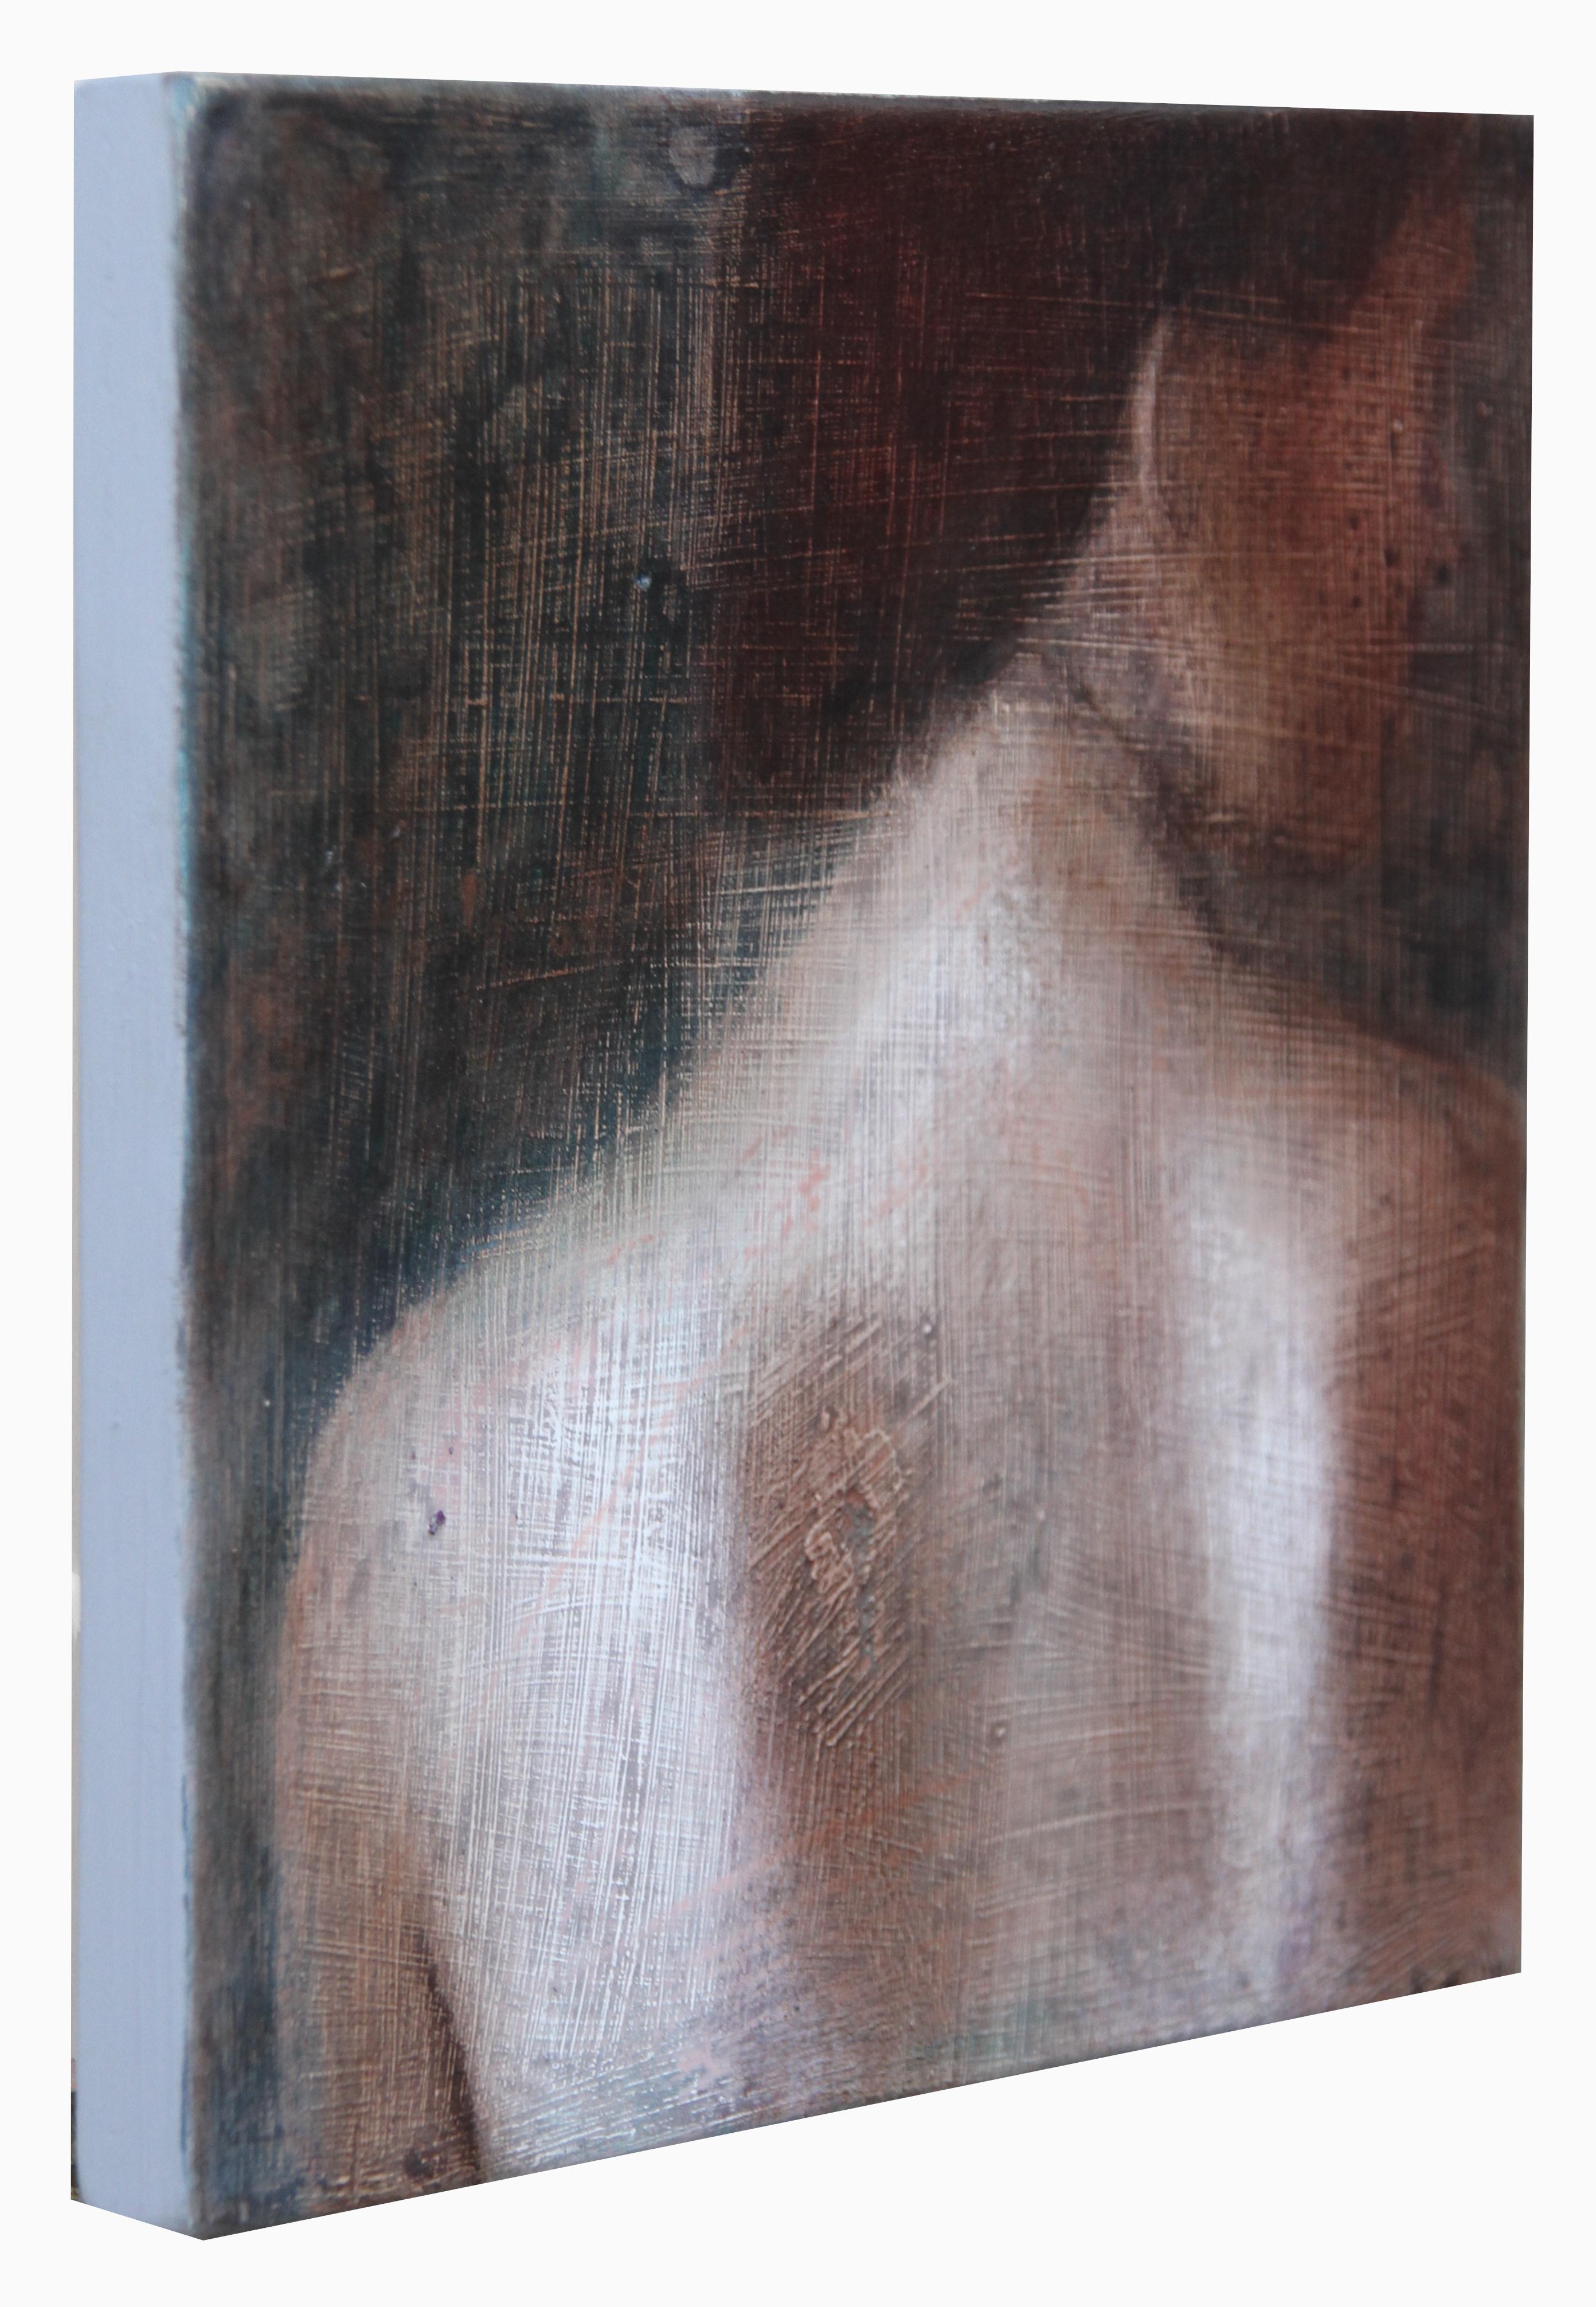 Fragment 10 (dreamy woman back skin female figurative painting soft Earth tones) - Post-Impressionist Painting by Rudolf Kosow